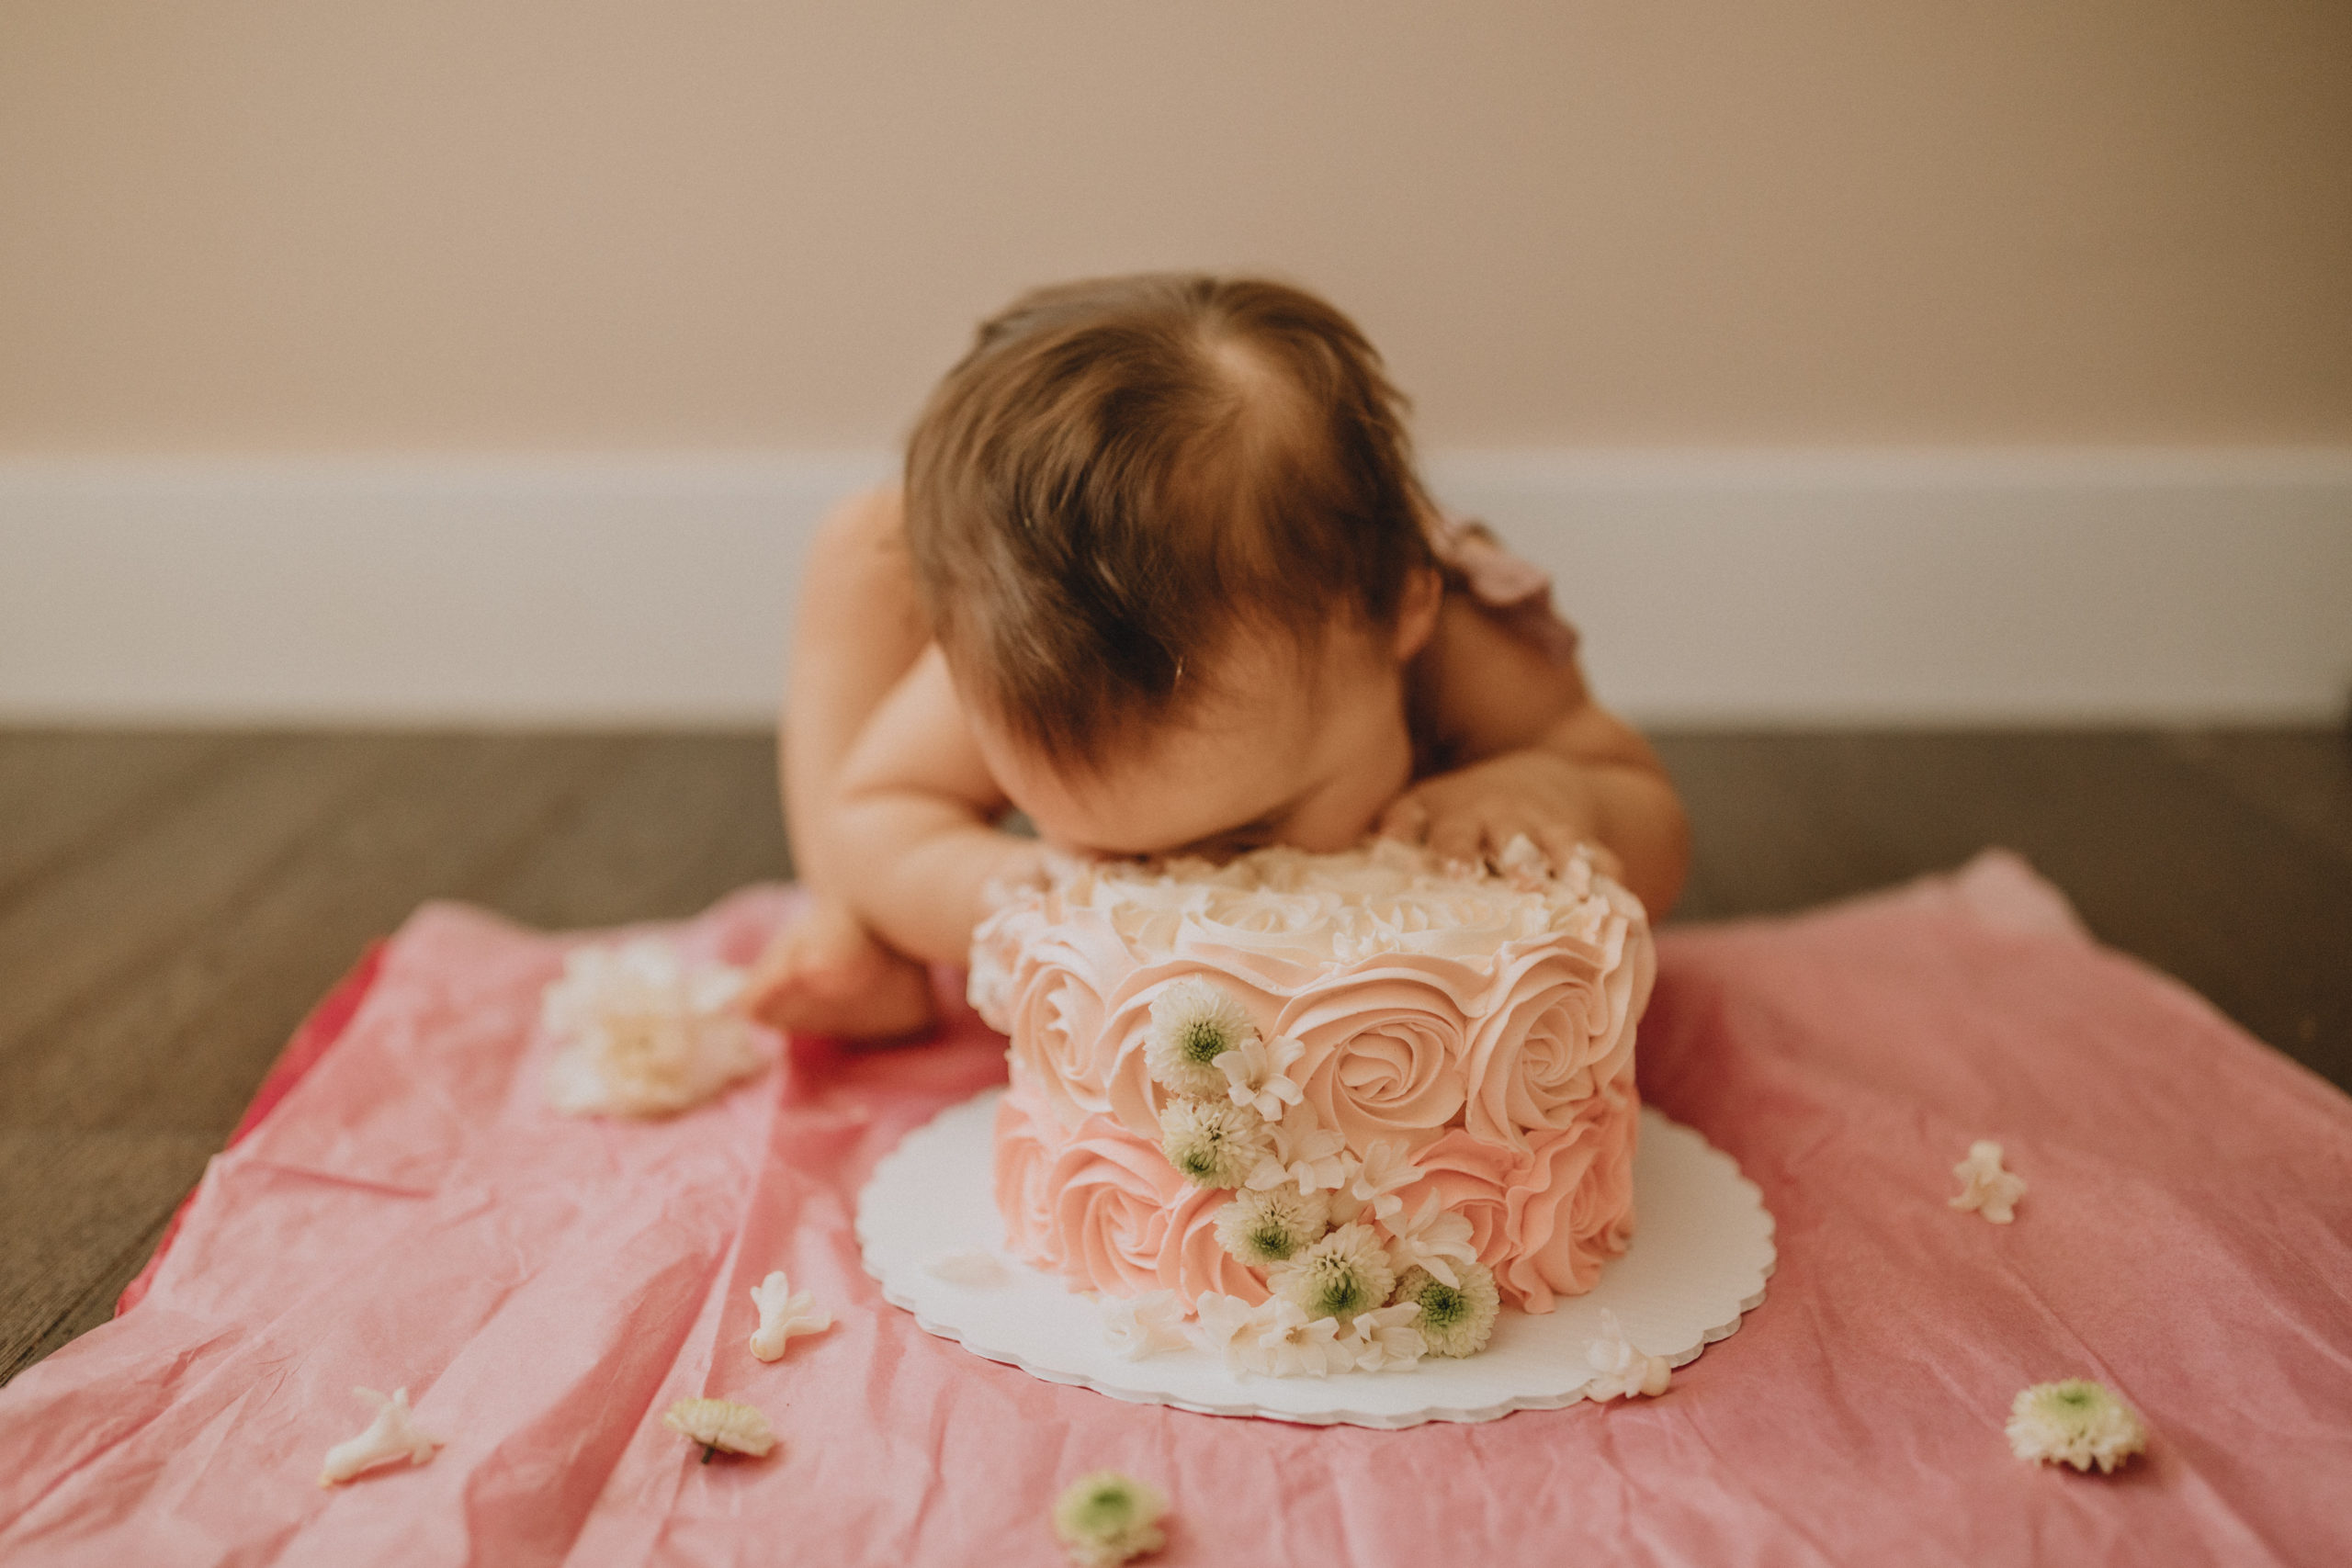 baby shoving her face in a cake